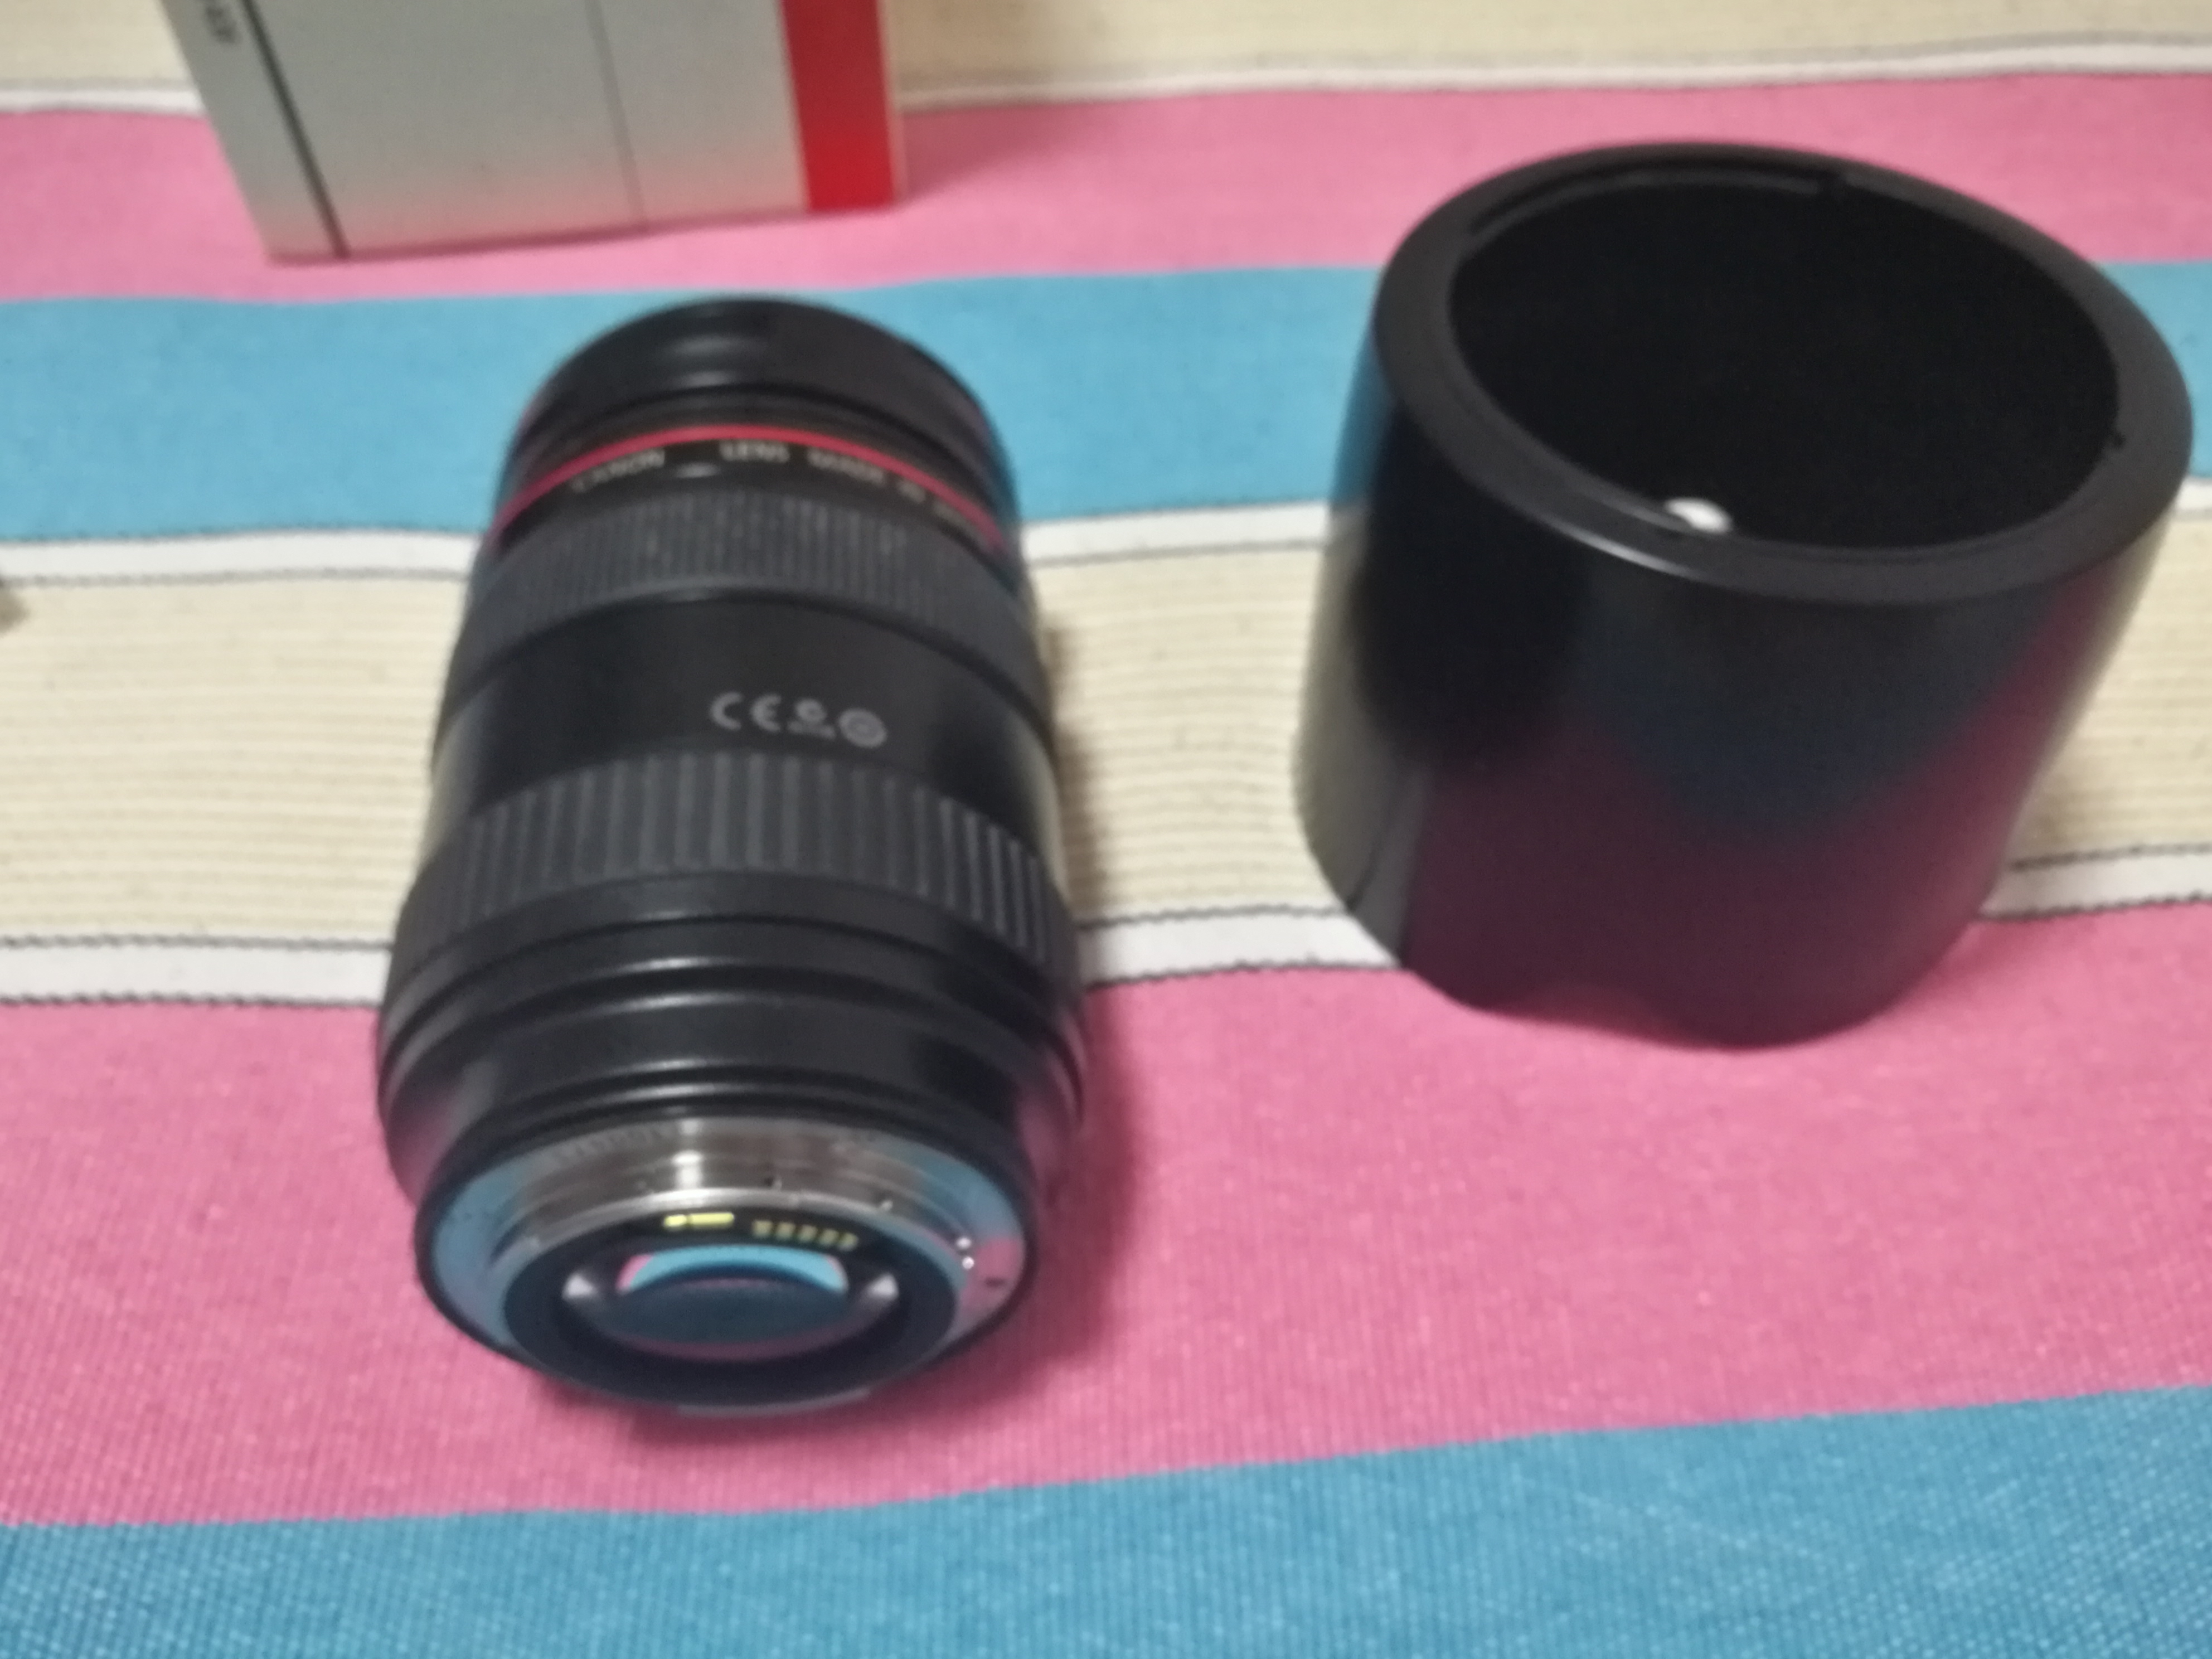  Canon EF 24-70mm f/2.8L USM lens can replace Canon 16-35 lens